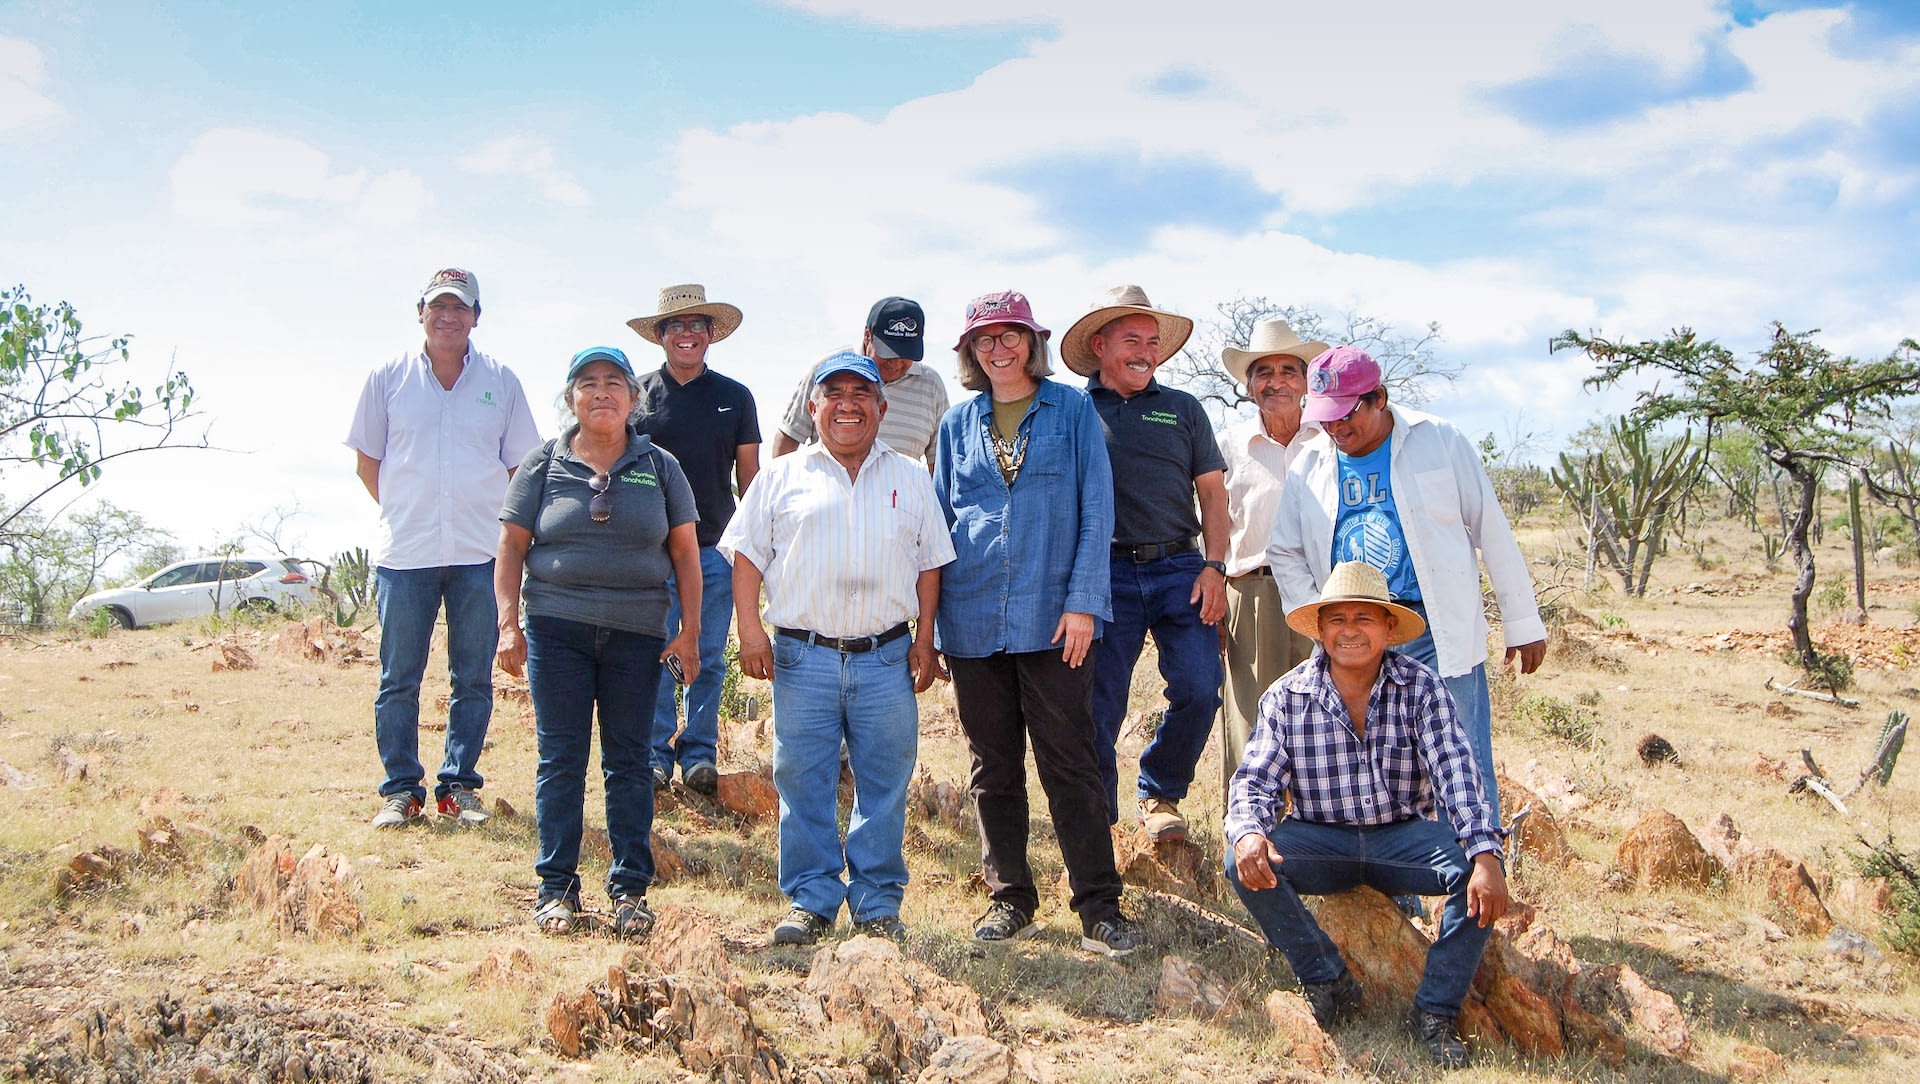 Denise Costich (center, pink hat) stands with members of the Totomoxtle project in Tonahuixtla. (Photo: Provided by Denise Costich/CIMMYT)